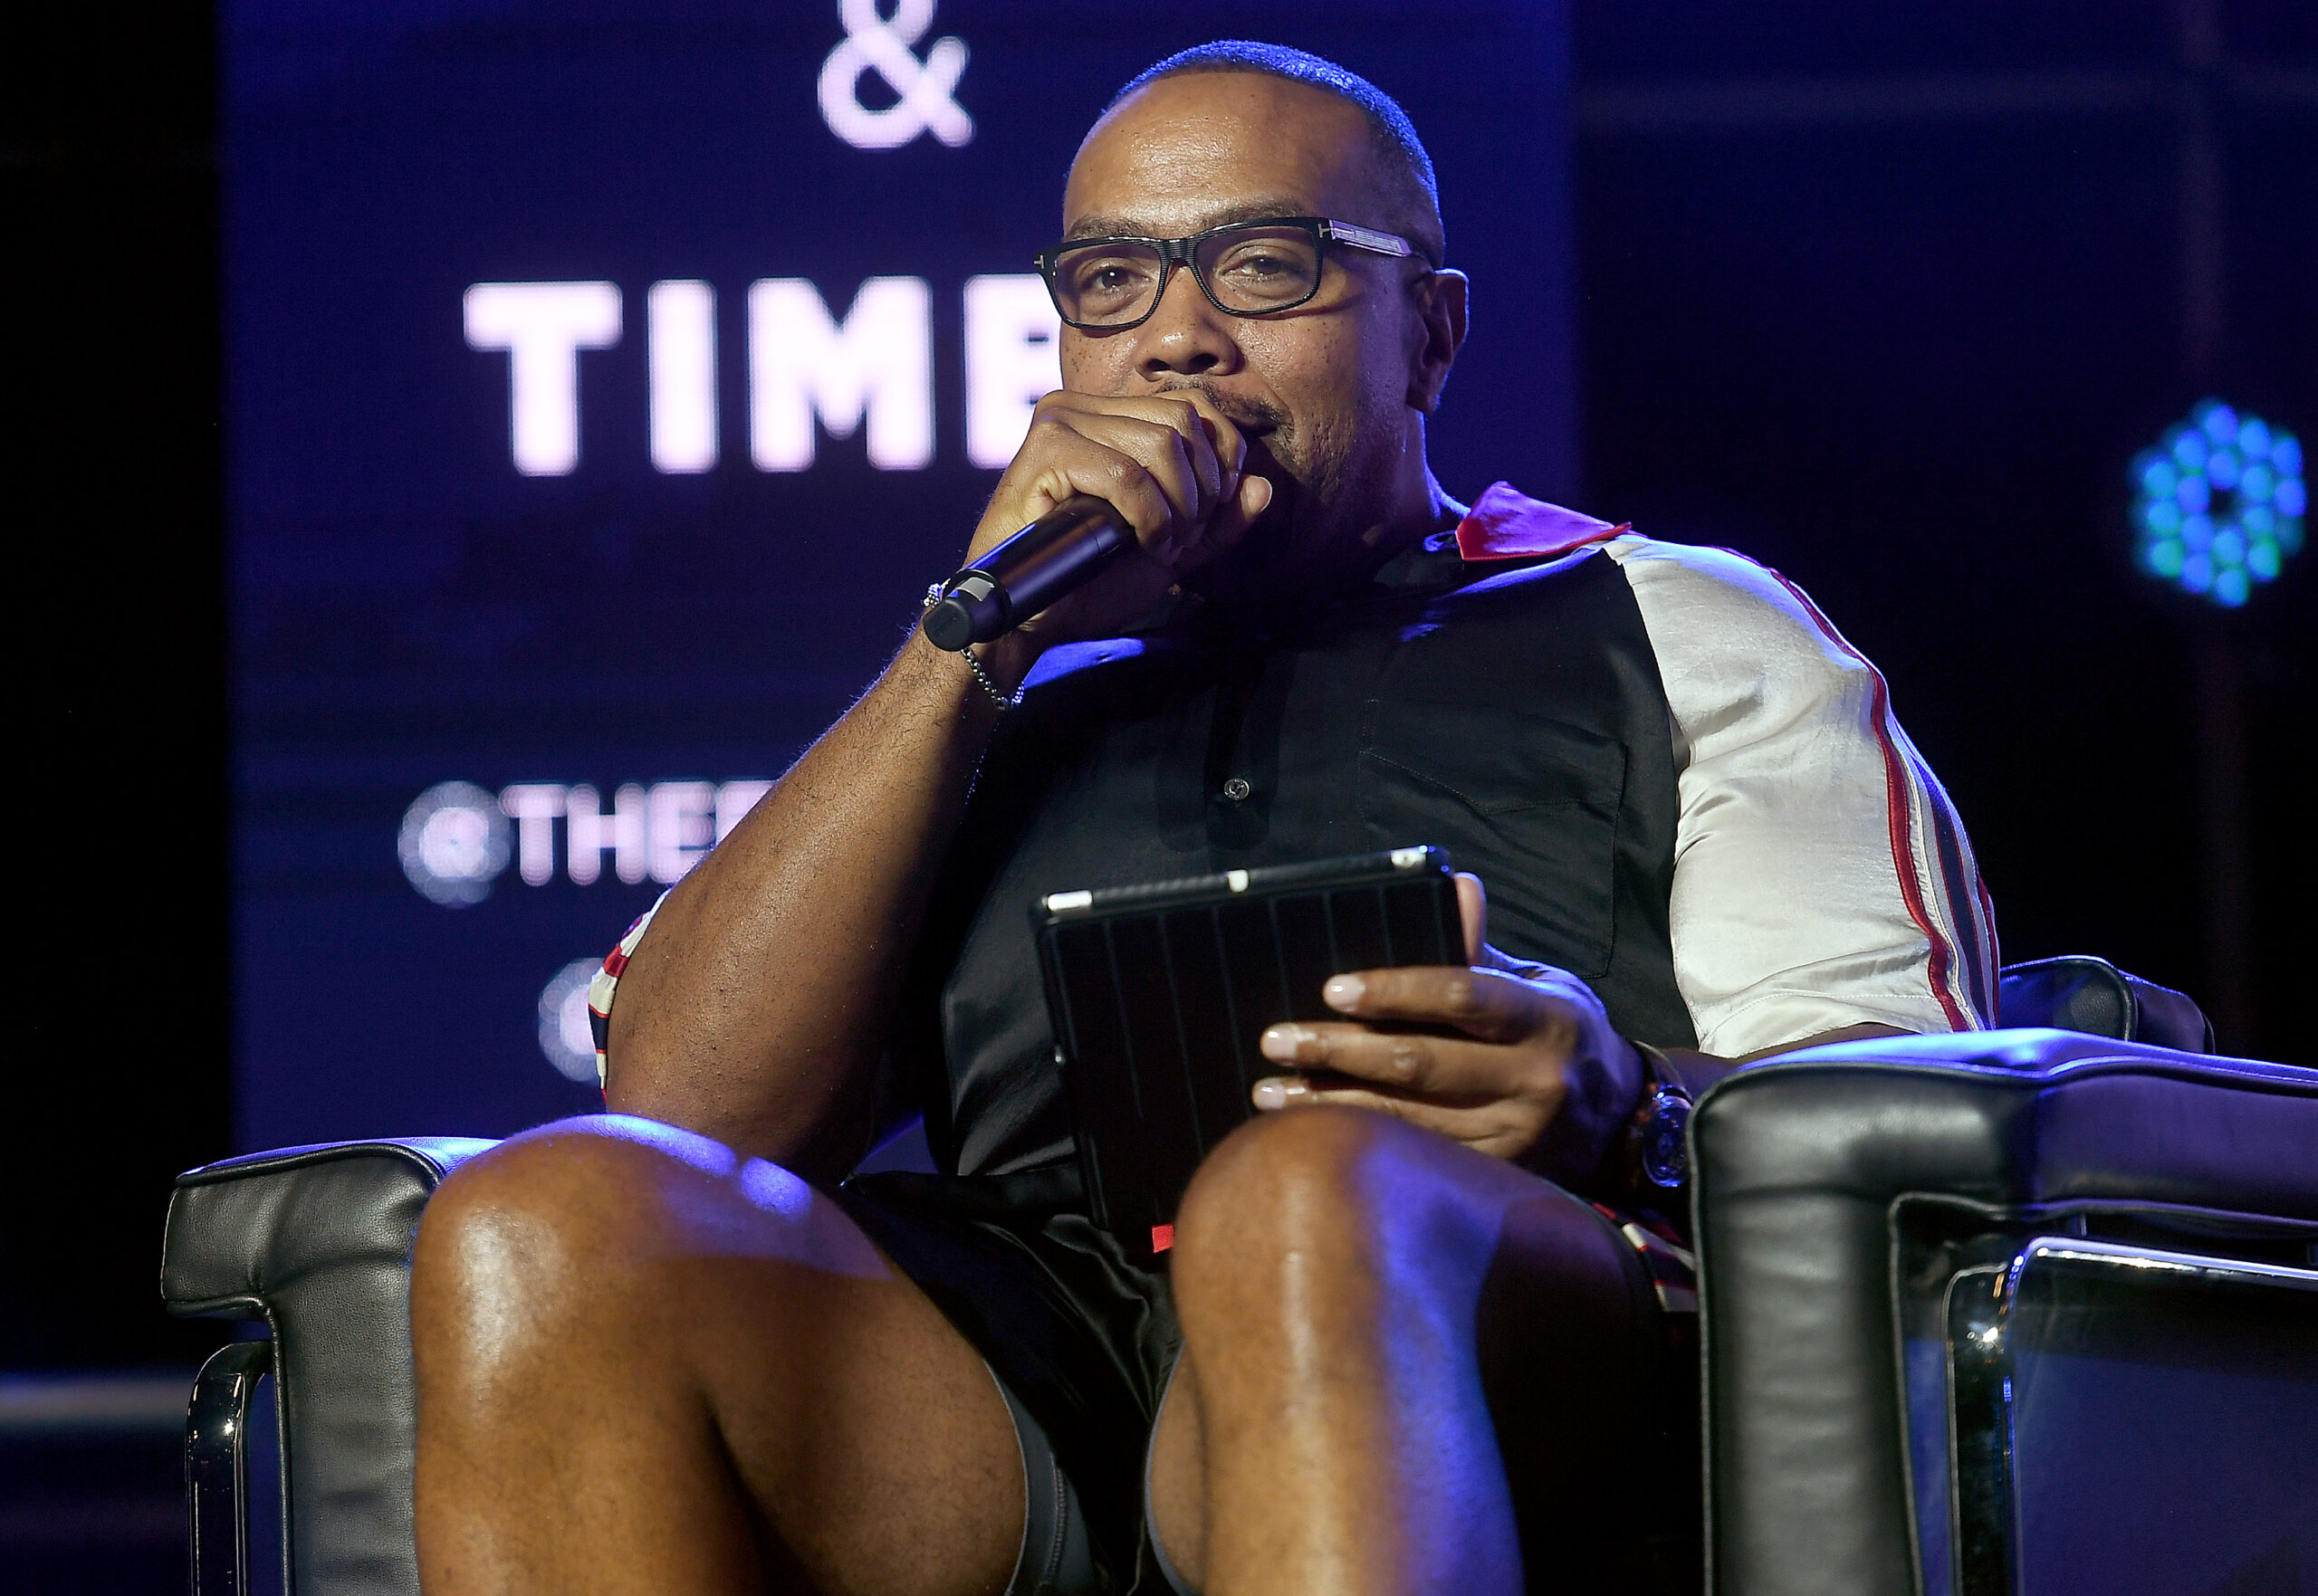 Timbaland Discusses Hair Transplant Decision: “Don’t Be Jealous”